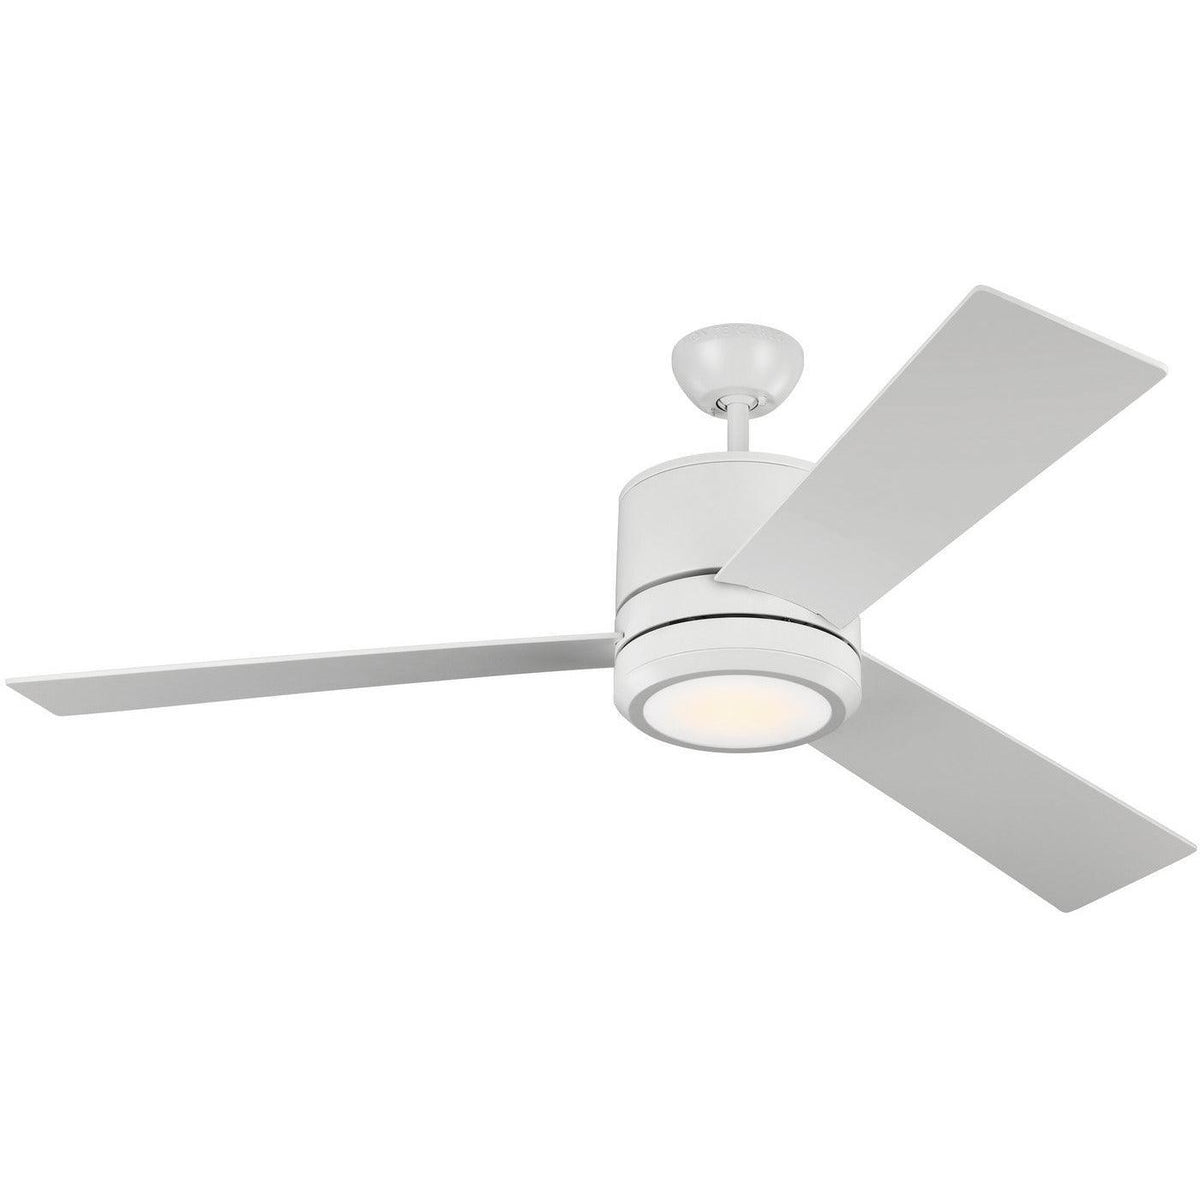 Visual Comfort Fan Collection - Vision Max 56" Ceiling Fan - 3VNMR56RZWD-V1 | Montreal Lighting & Hardware